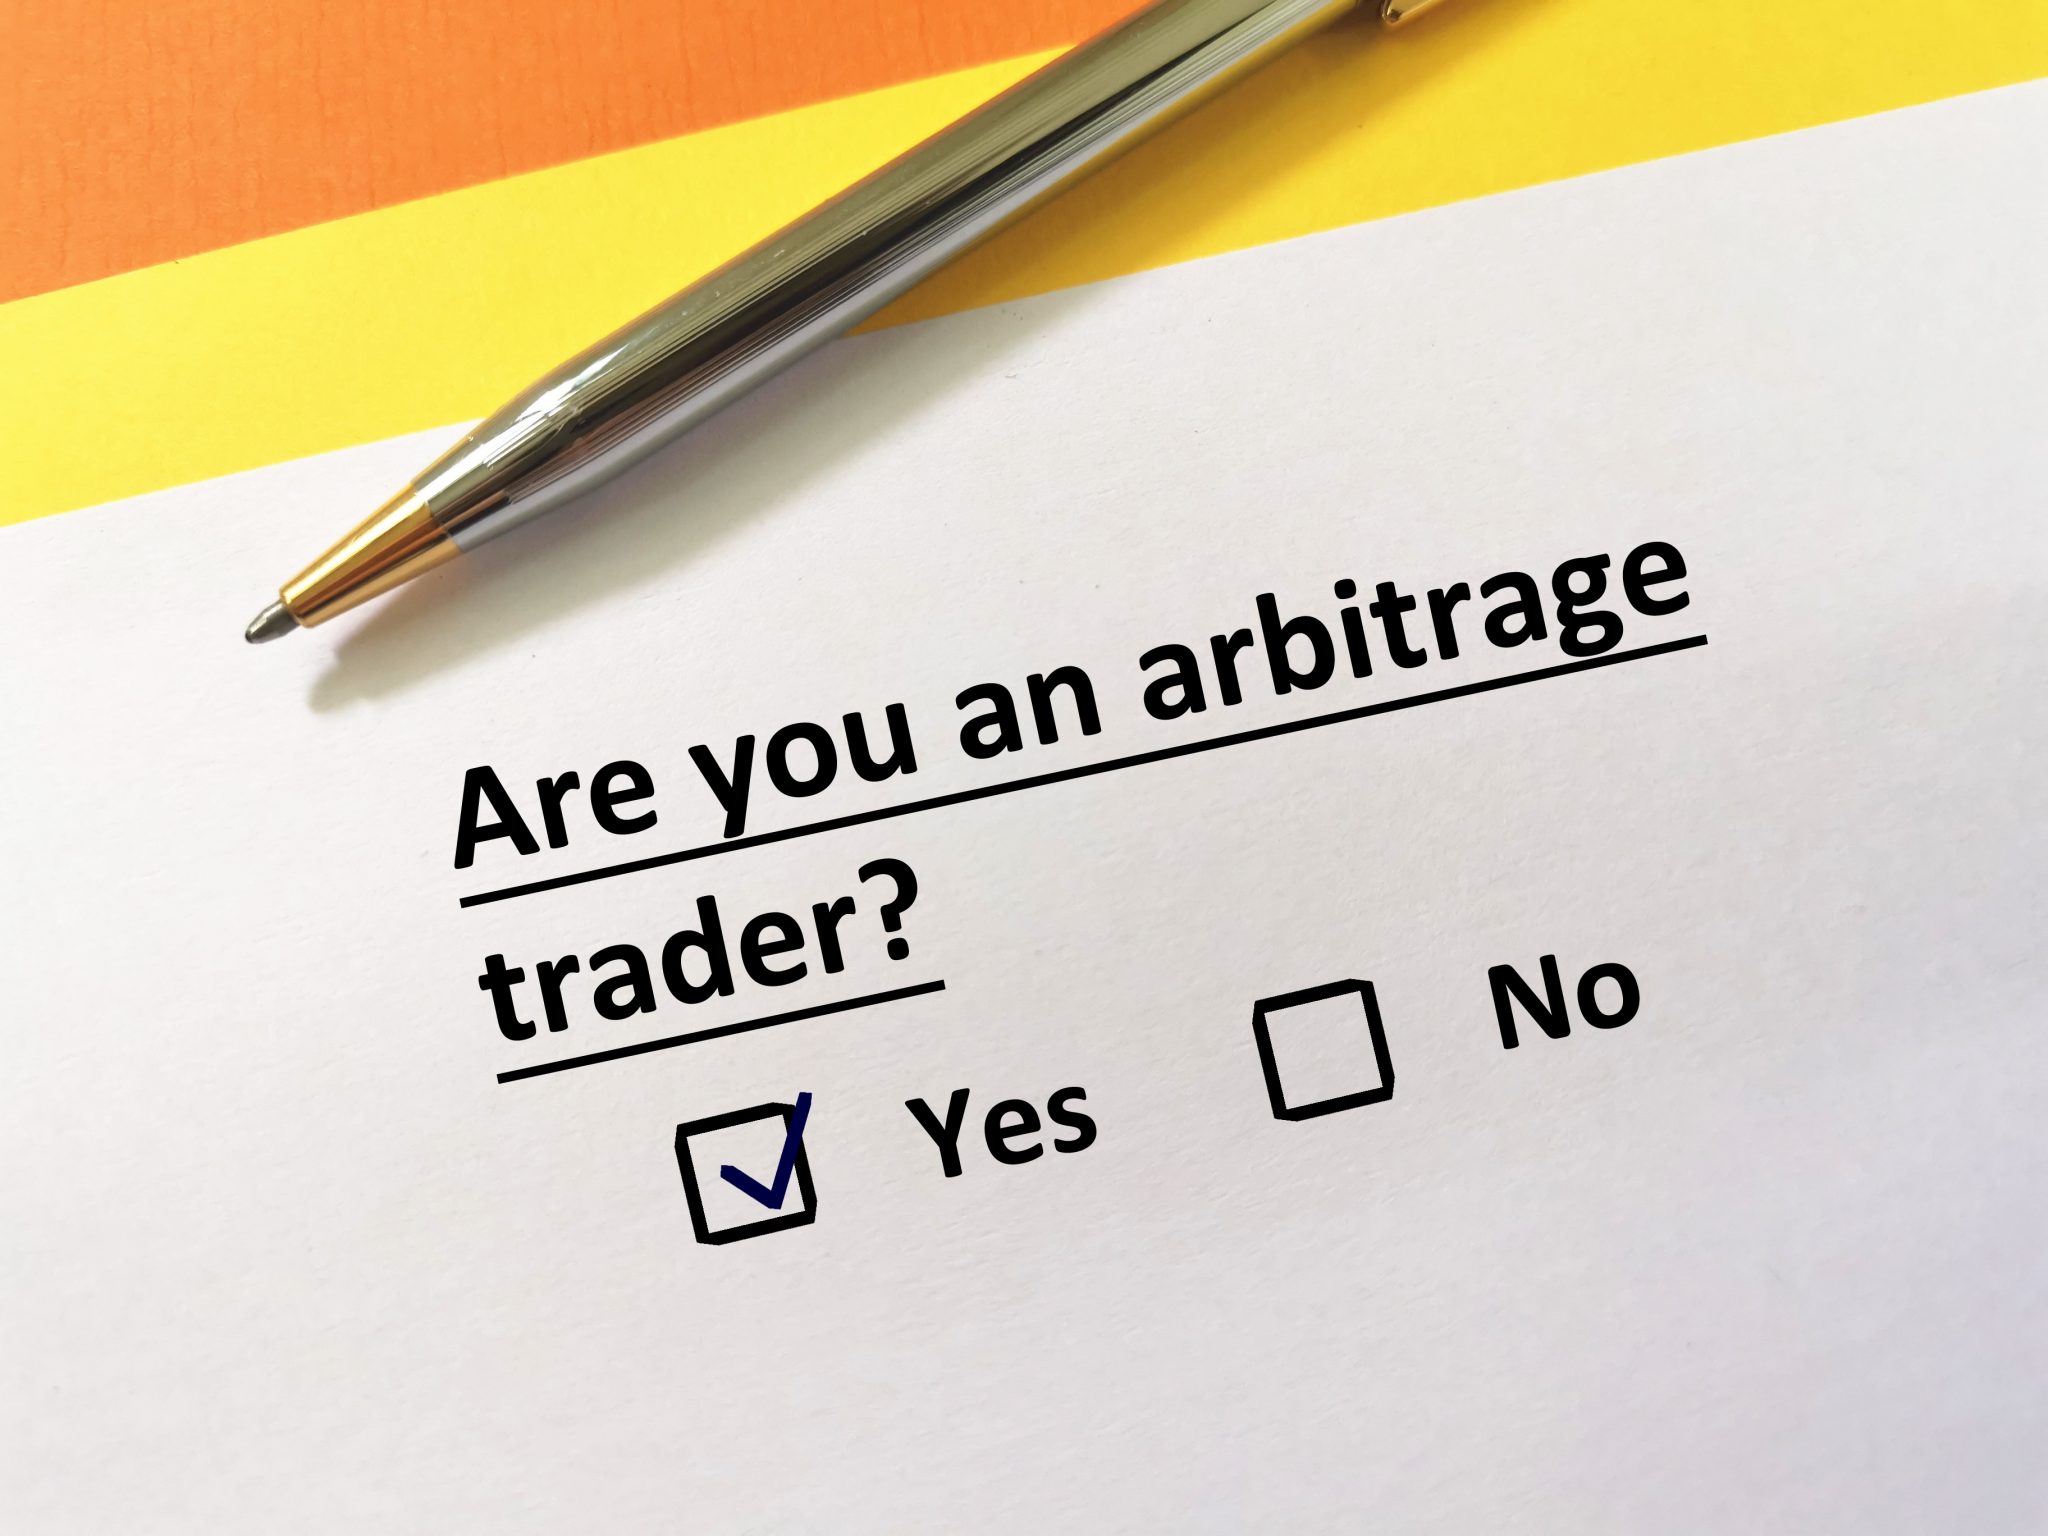 One person is answering question about trading. He is an arbitrage trader.